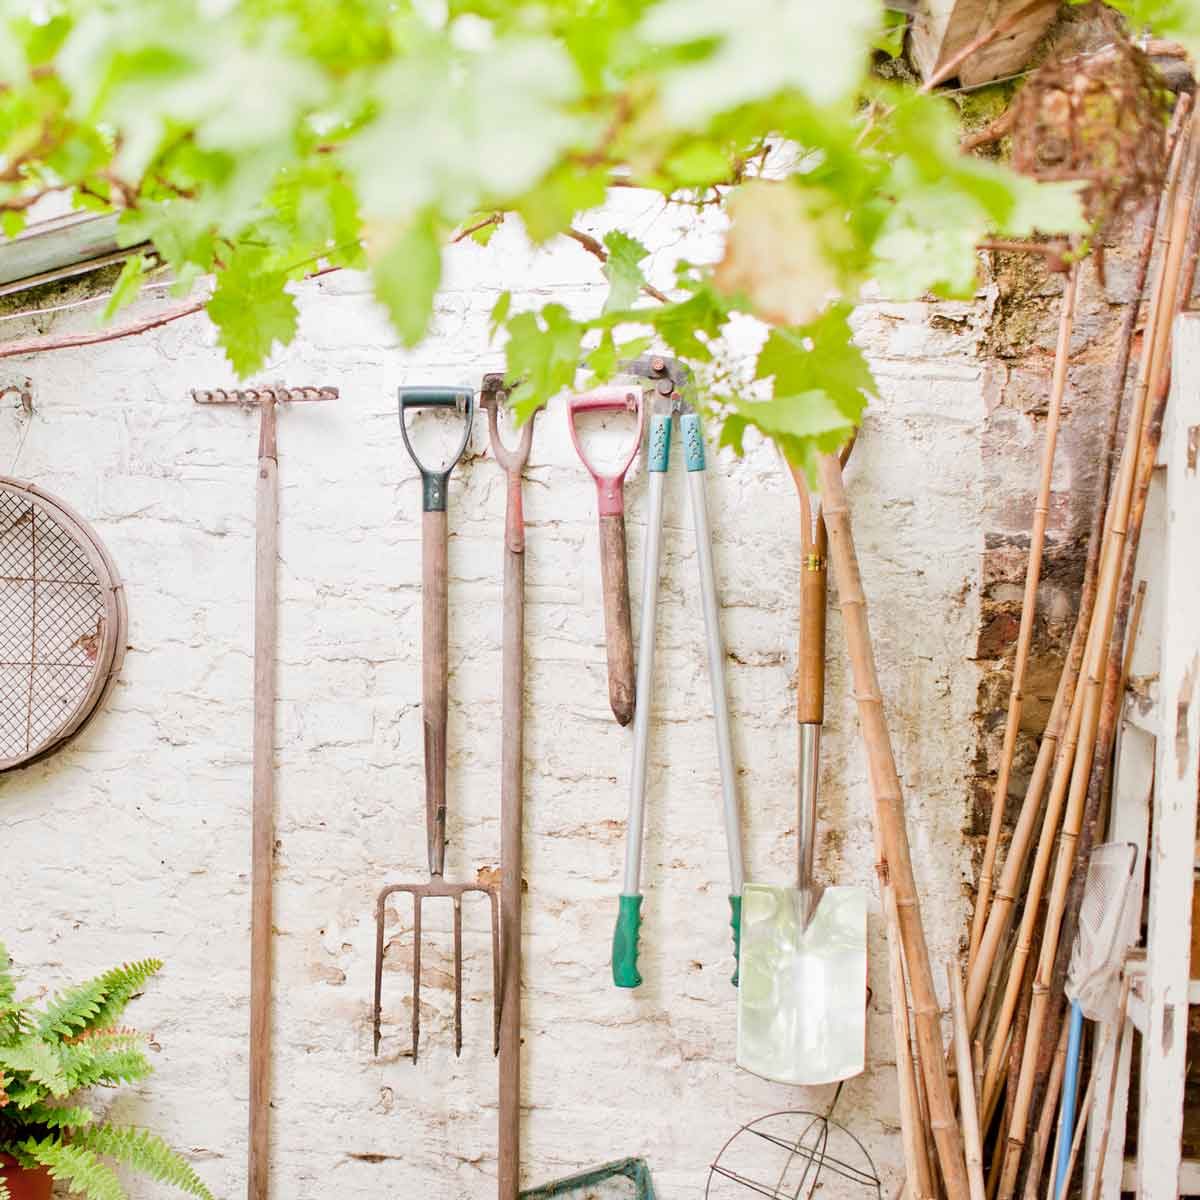 13 Essential Tools You Need in Your Home 